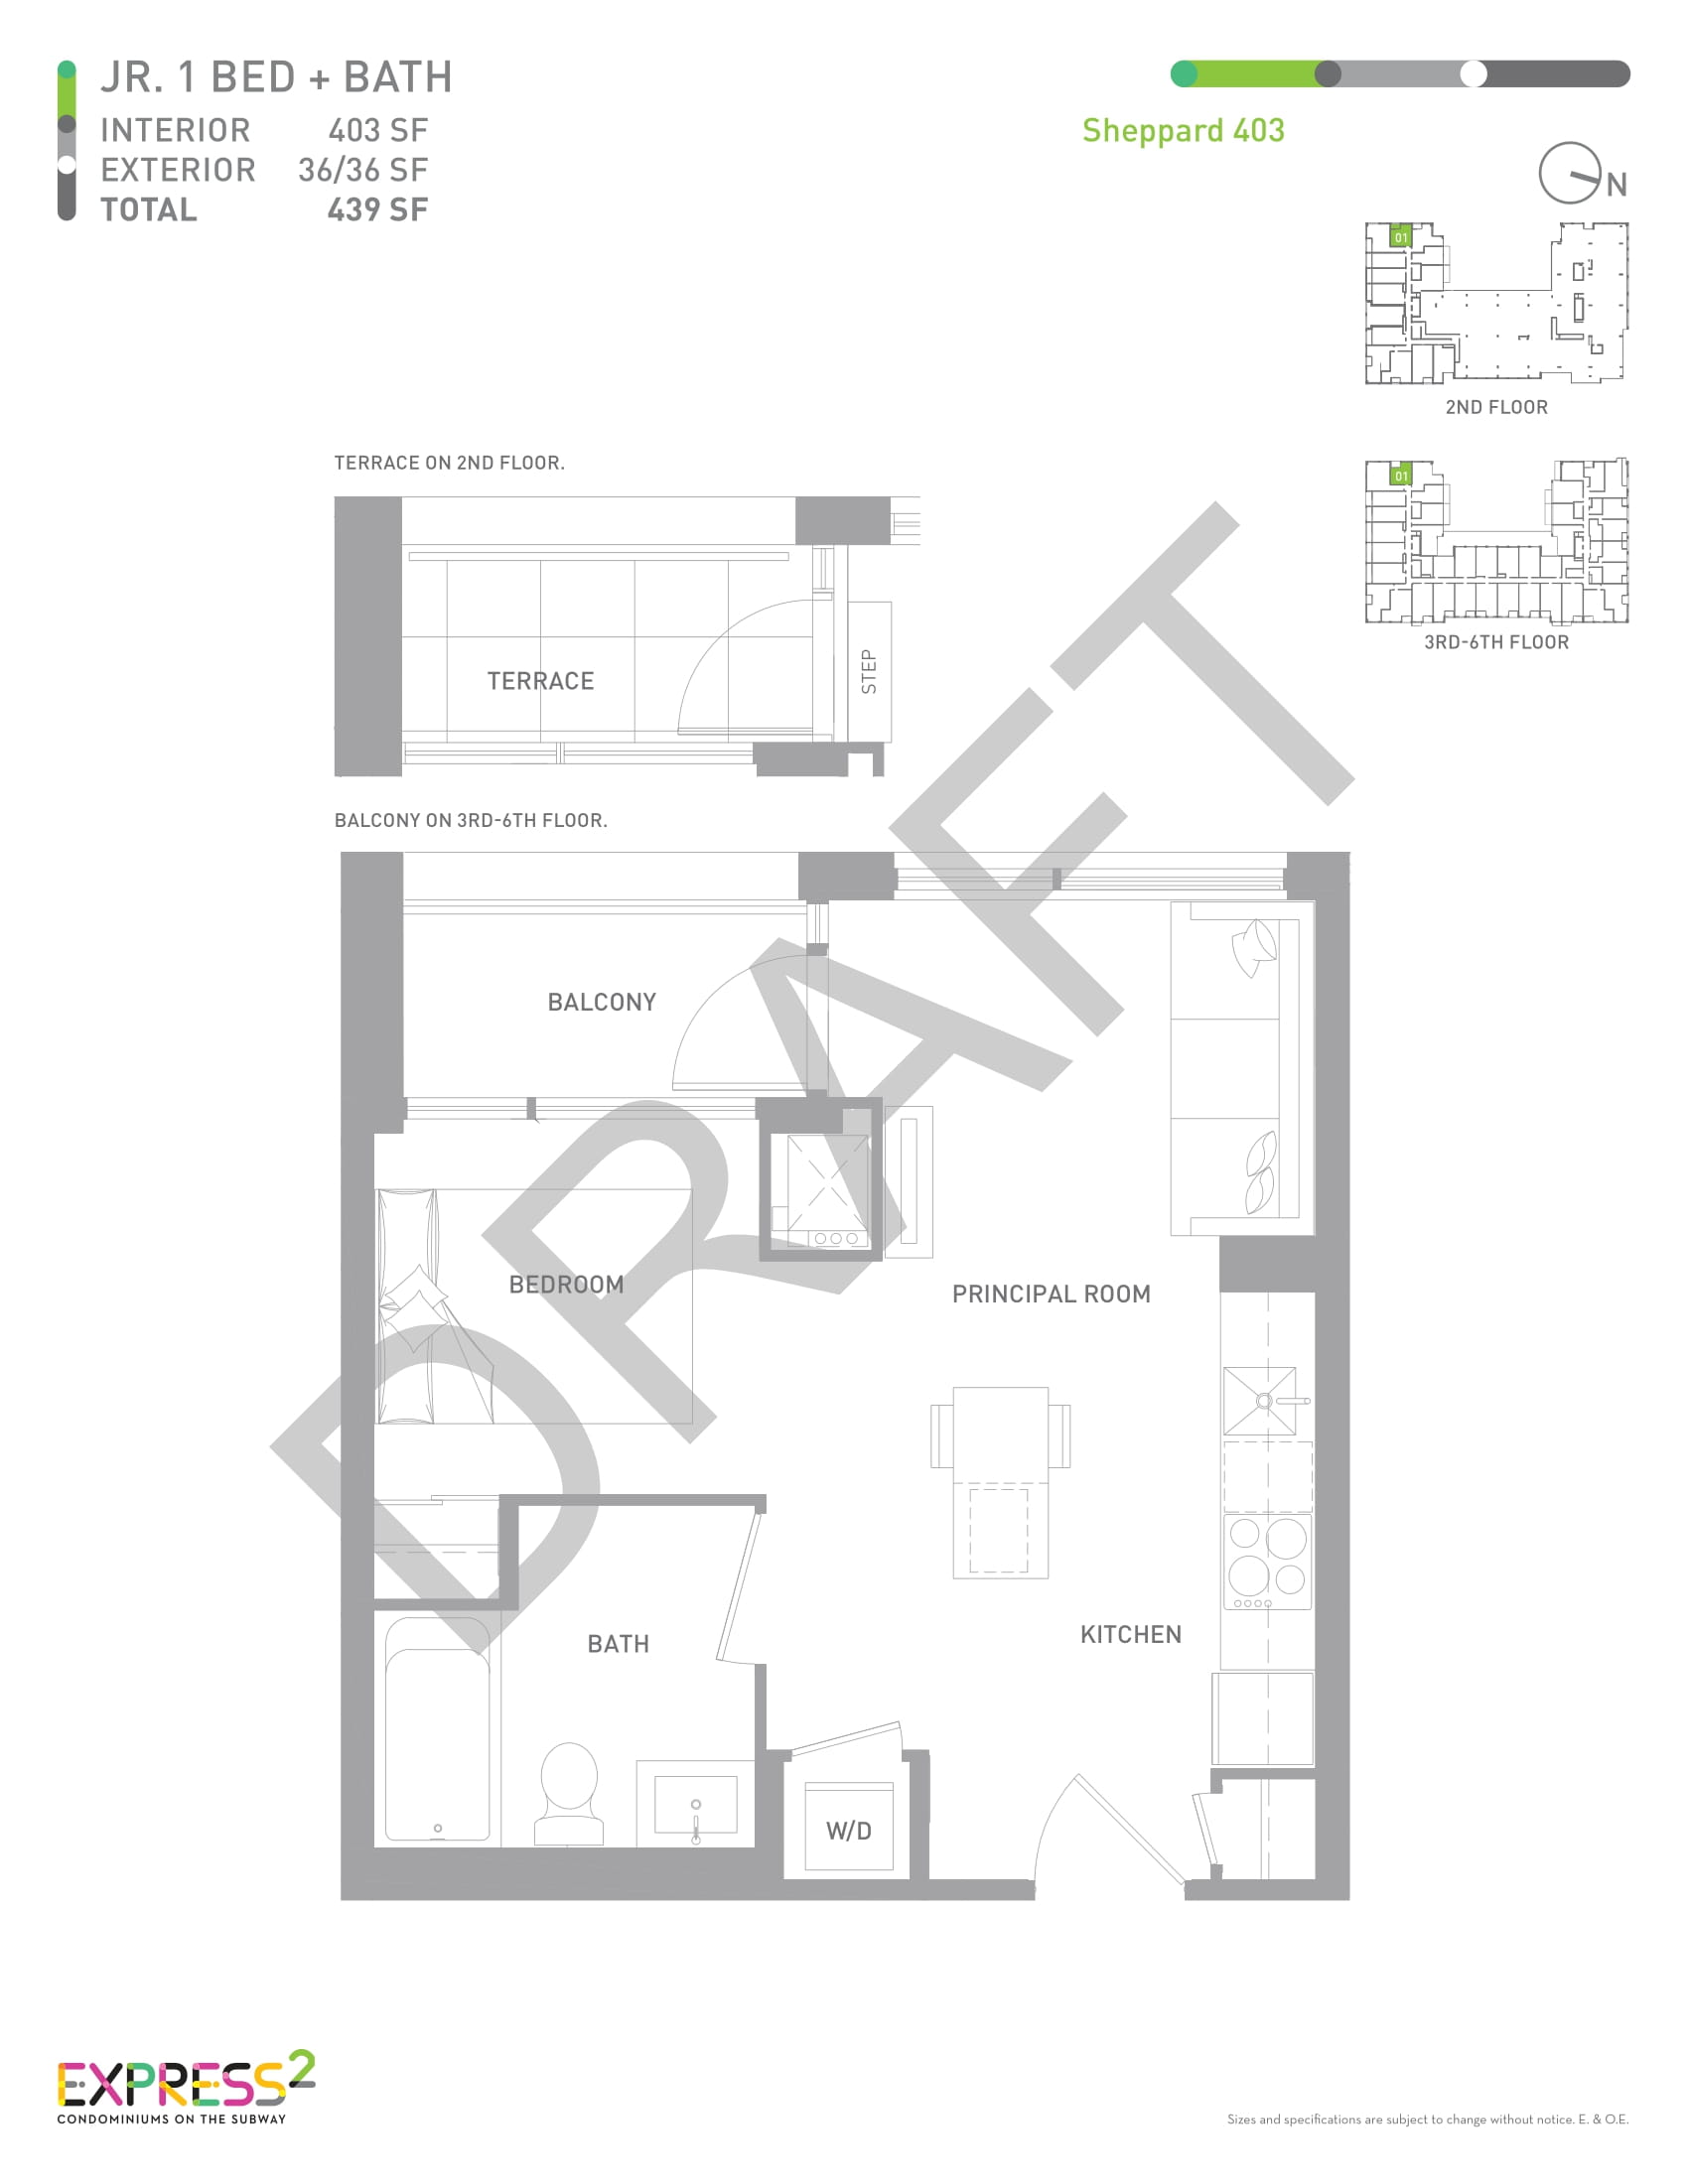 Express 2 Preview Floor Plans-01